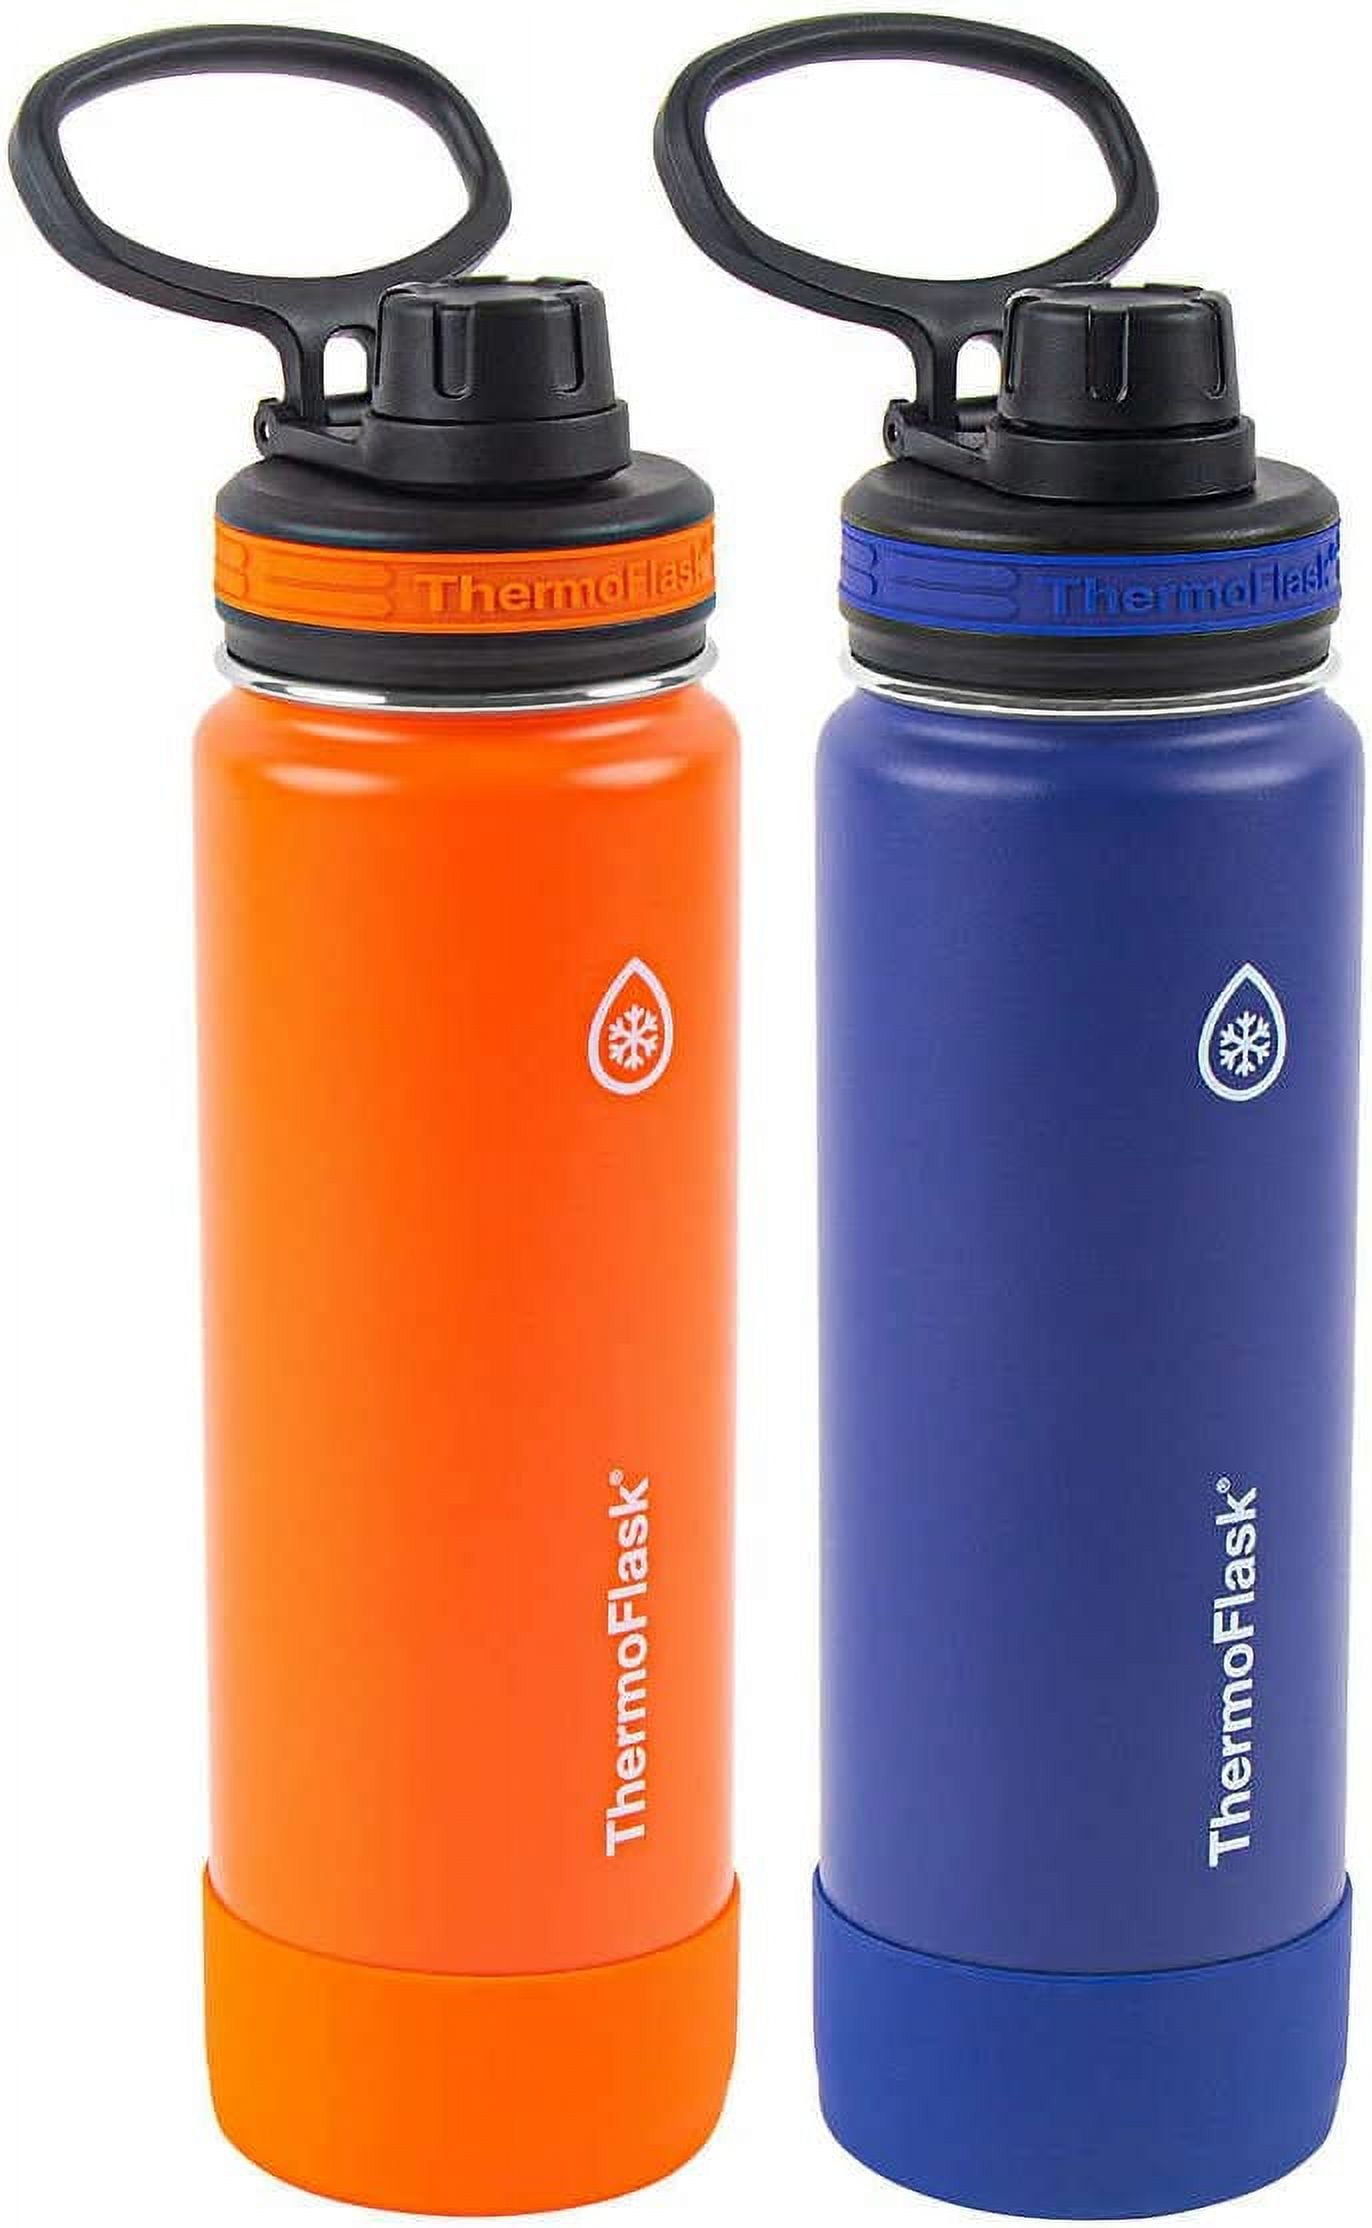 ThermoFlask 24oz Stainless Steel Insulated Water Bottles, 2-pack